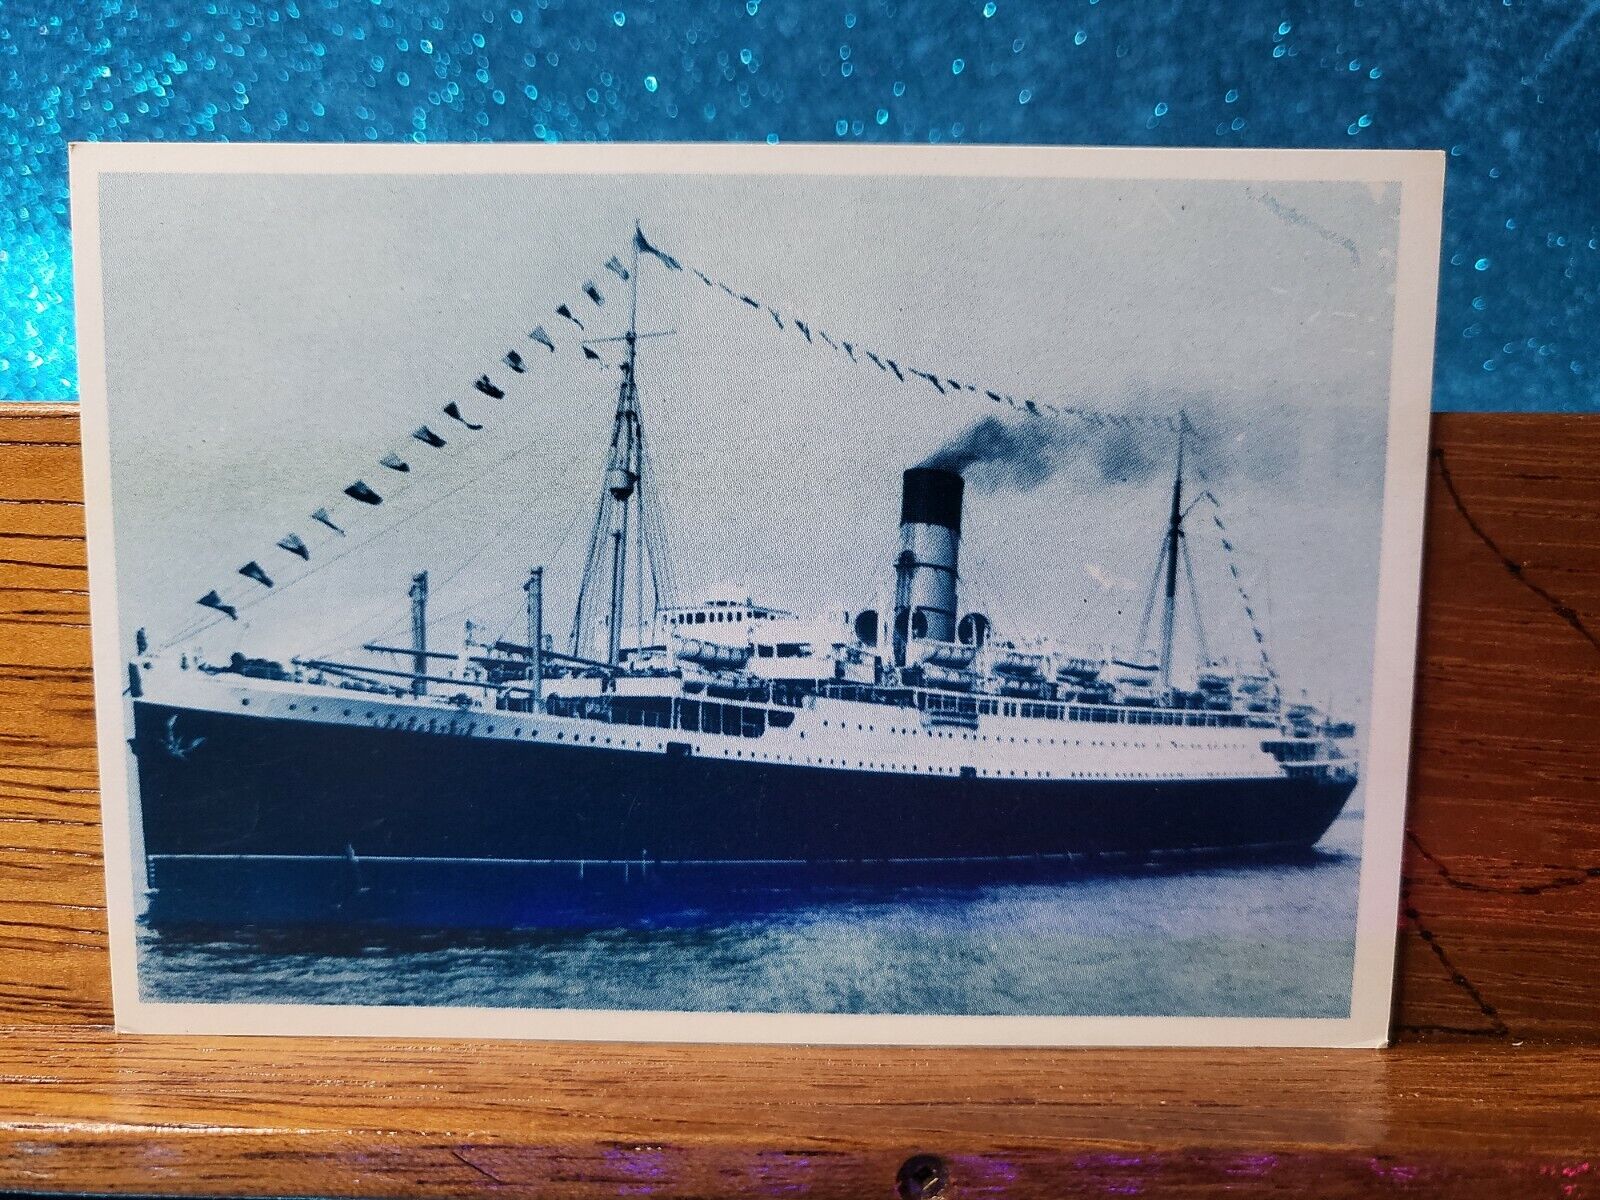 WEET BIX Picture Cards of Famous Ships🏆#5  S.S. LANCASTRIA 1964 Card🏆FREE POST